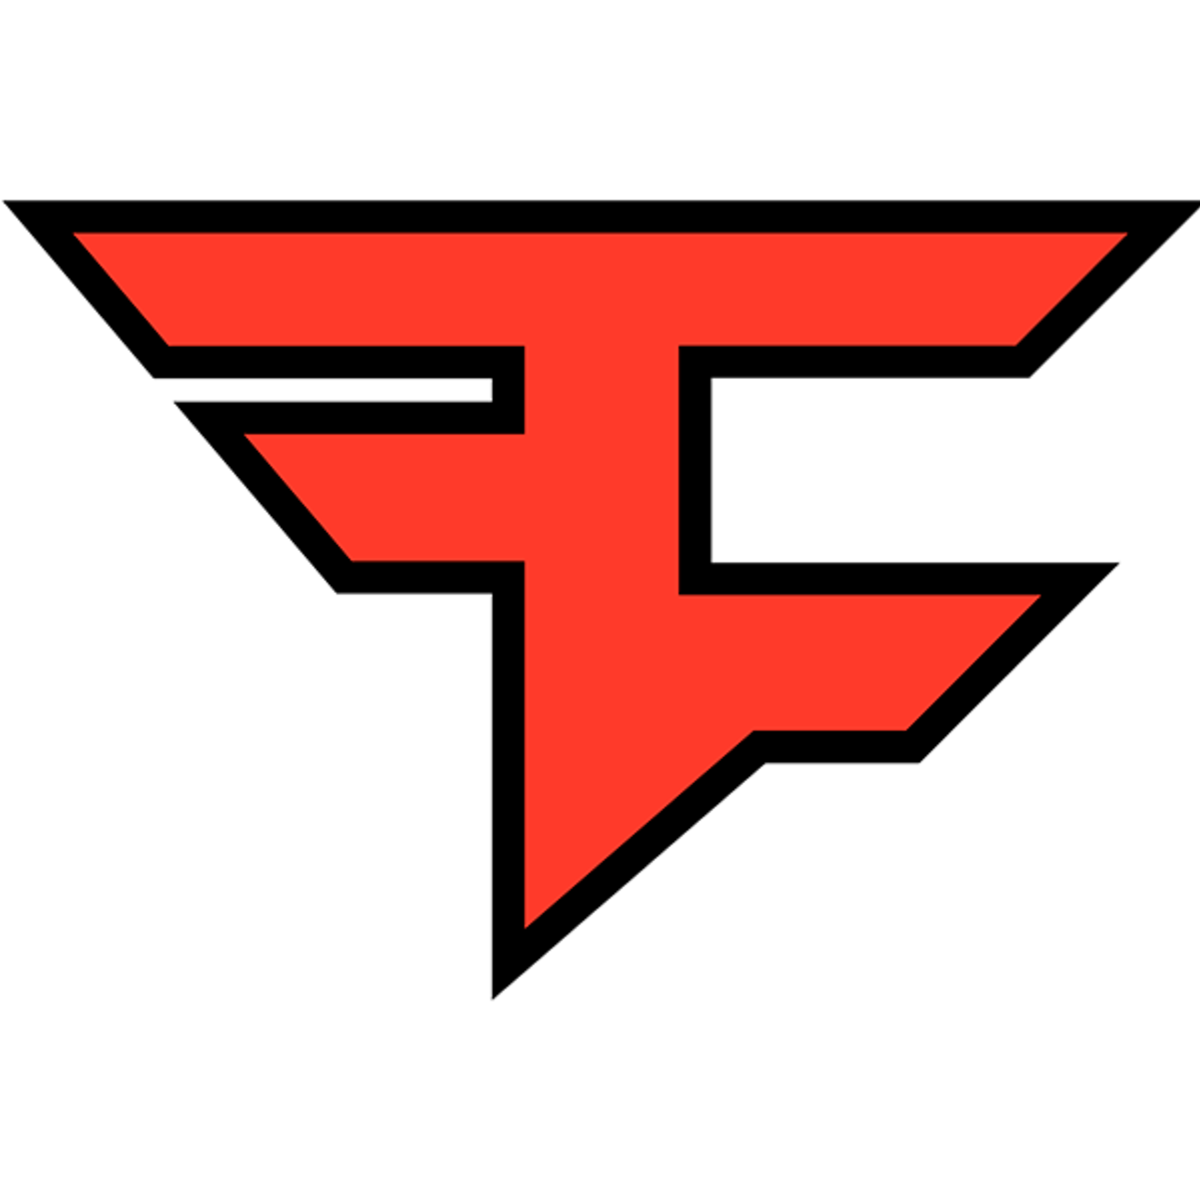 FaZe vs Vitality Prediction: It is challenging to predict the winner